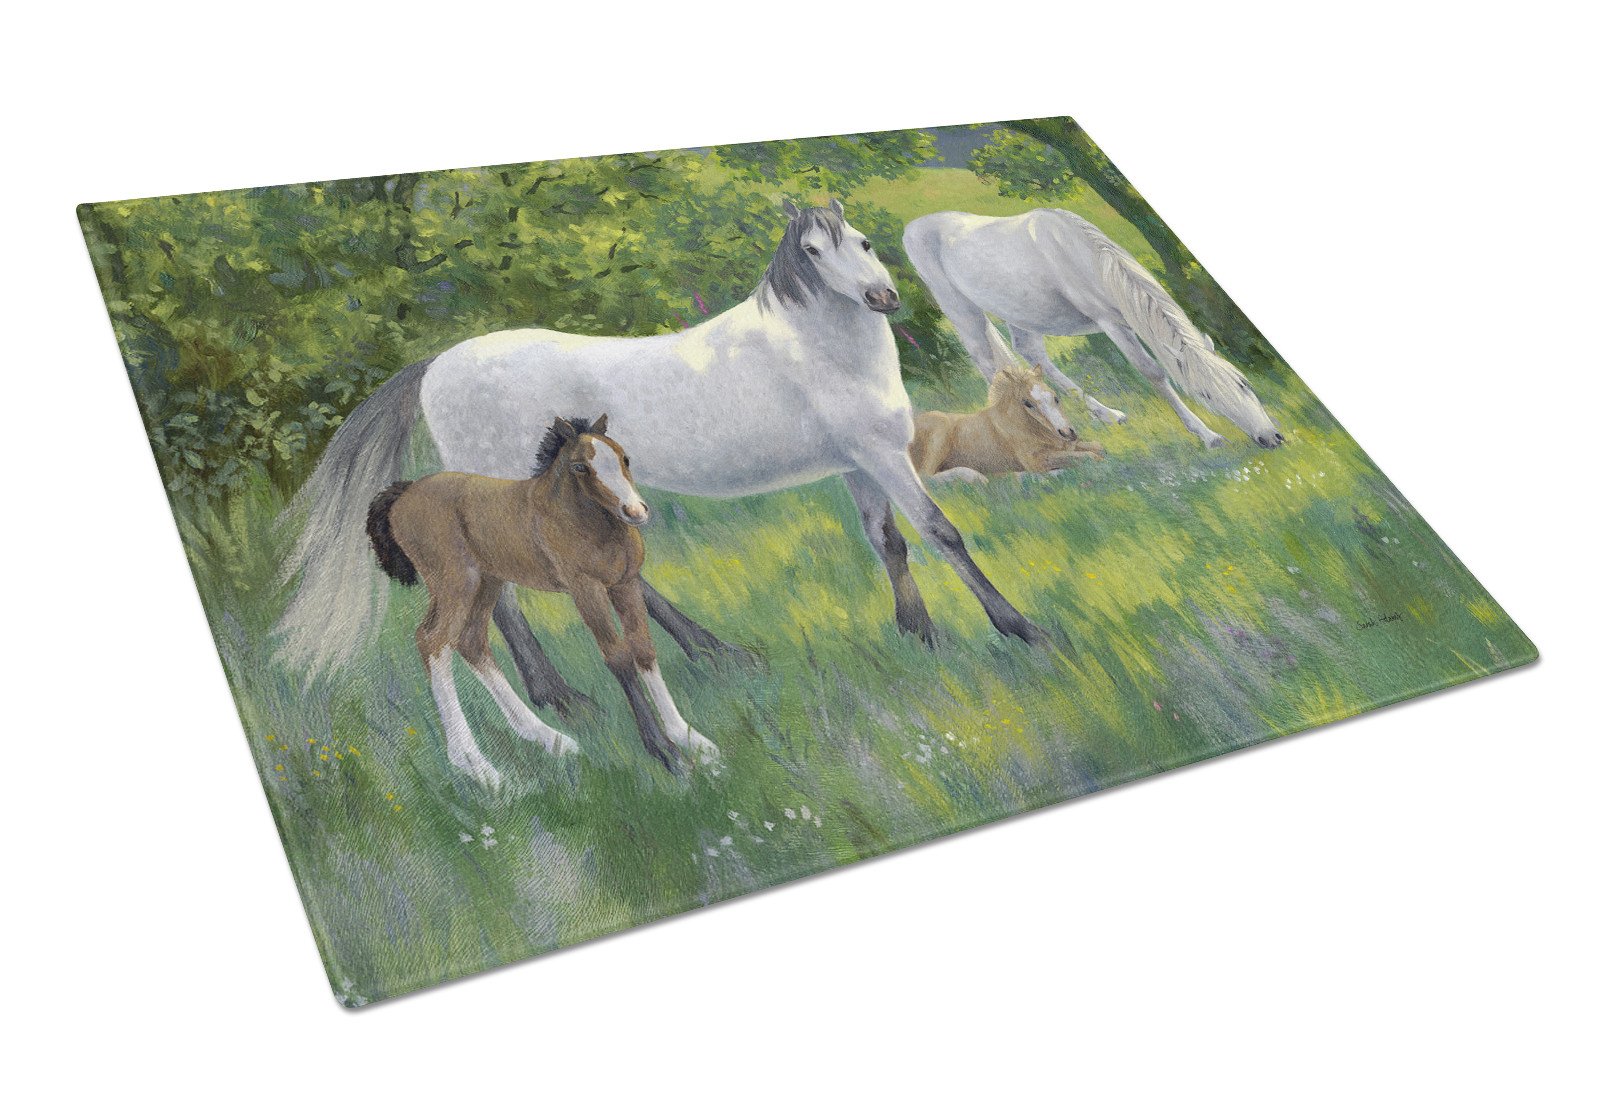 Group of Horses Glass Cutting Board Large ASA2195LCB by Caroline's Treasures